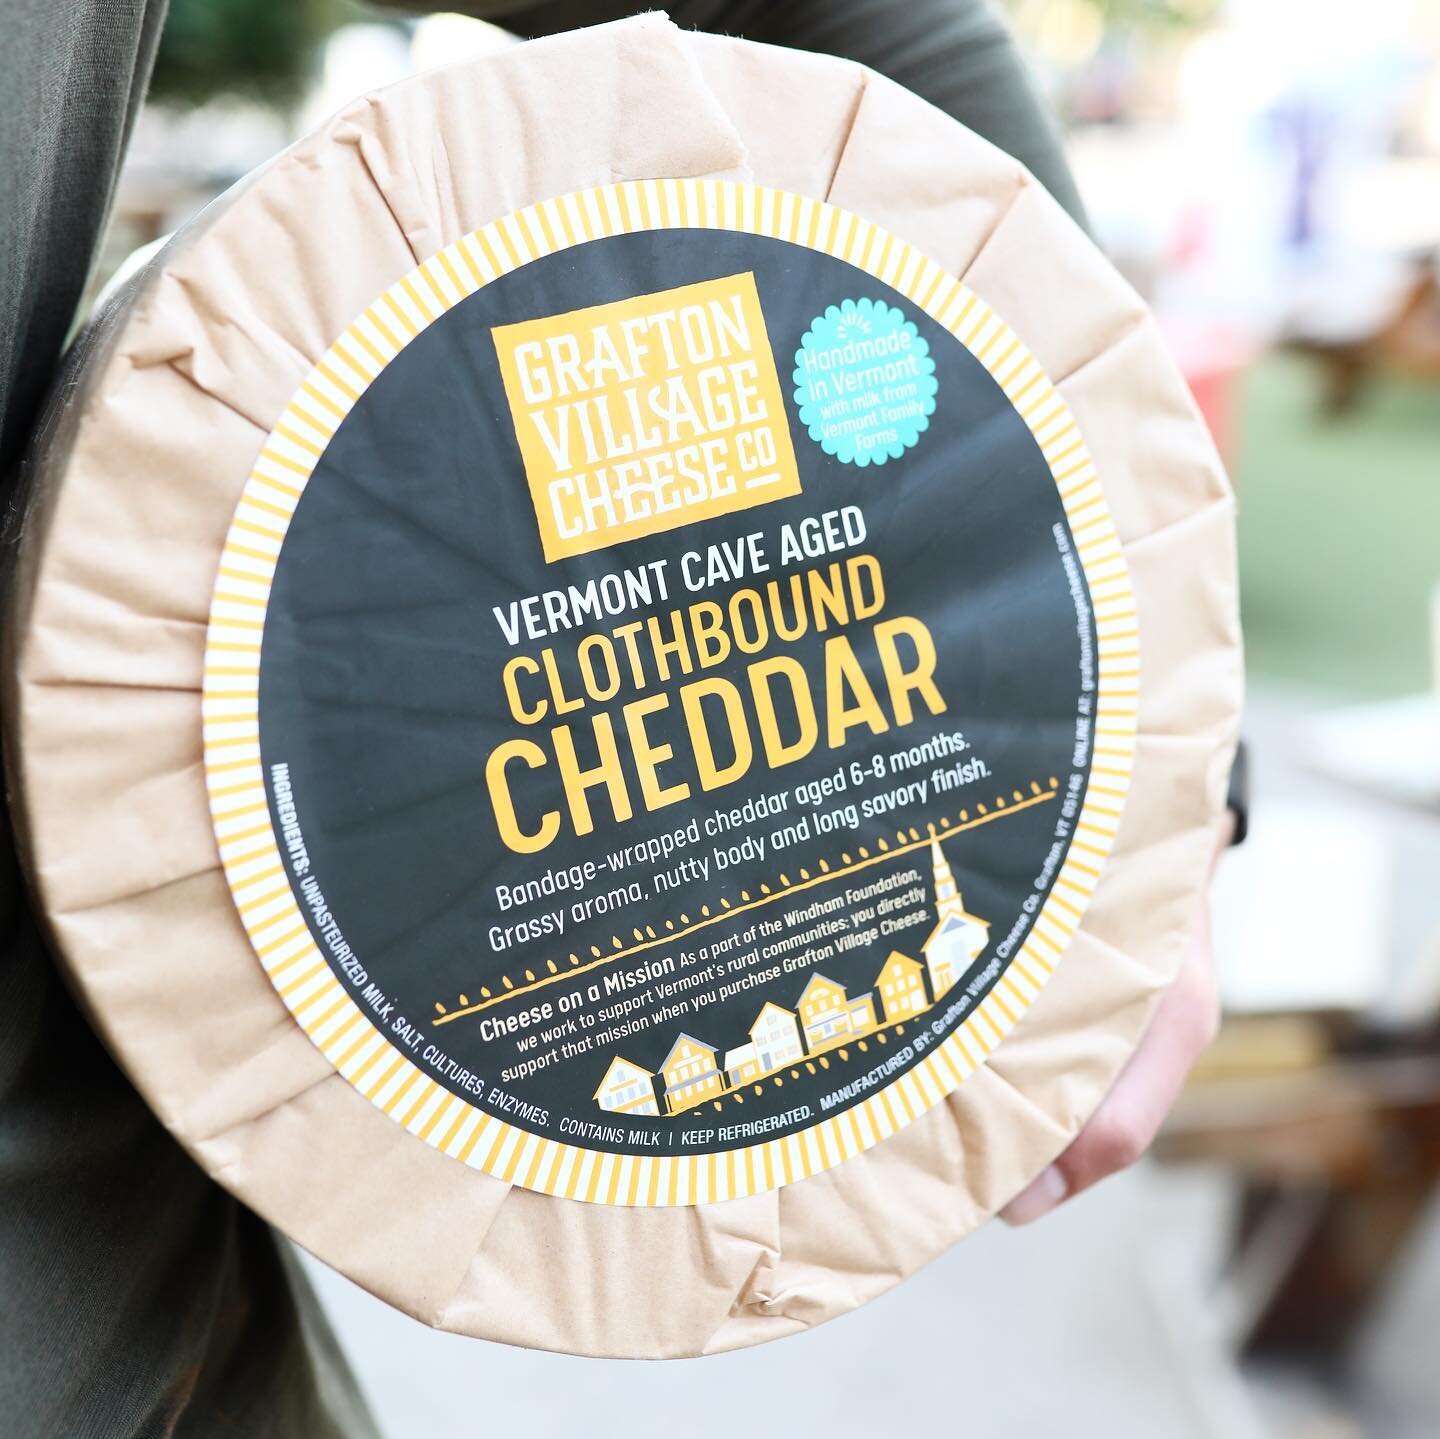 *new product*

Vermont cave aged cloth bound cheddar.

Grassy aroma, nutty body and long savory finish. @graftoncheese